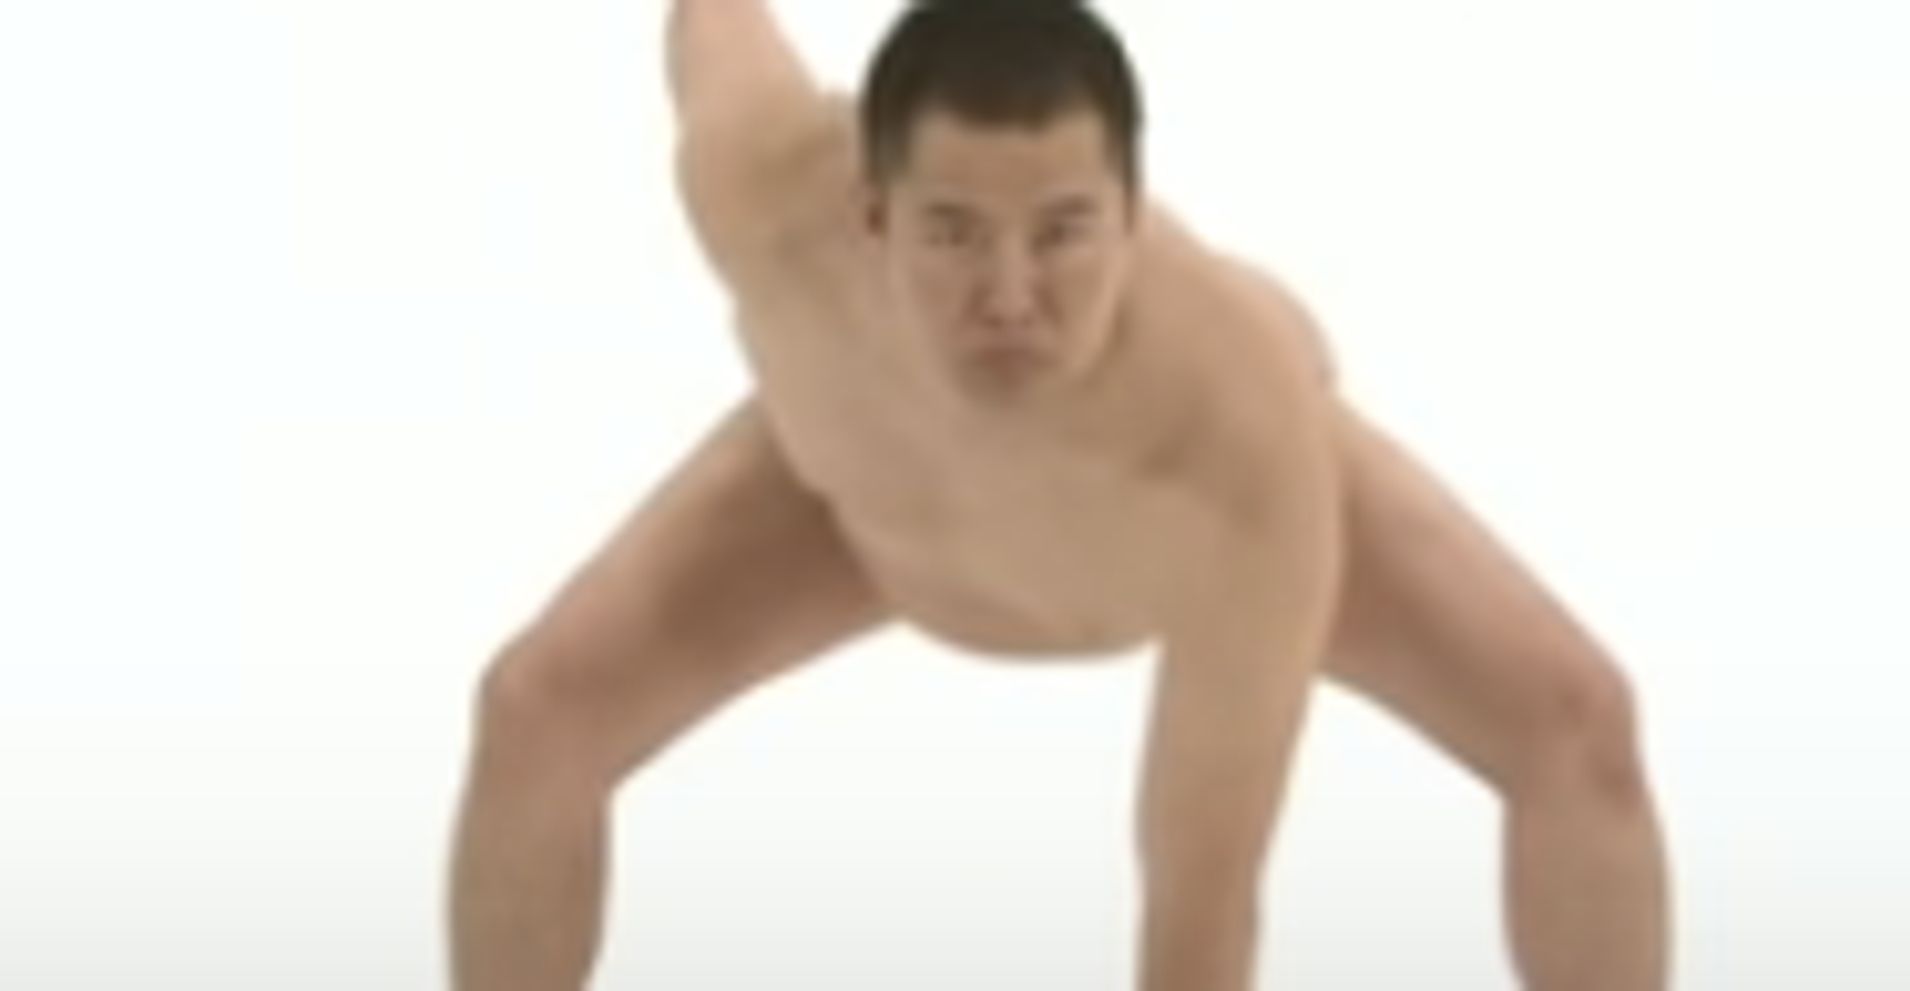 Watch A Japanese Man Do 'American Butt Naked Poses' HuffPost